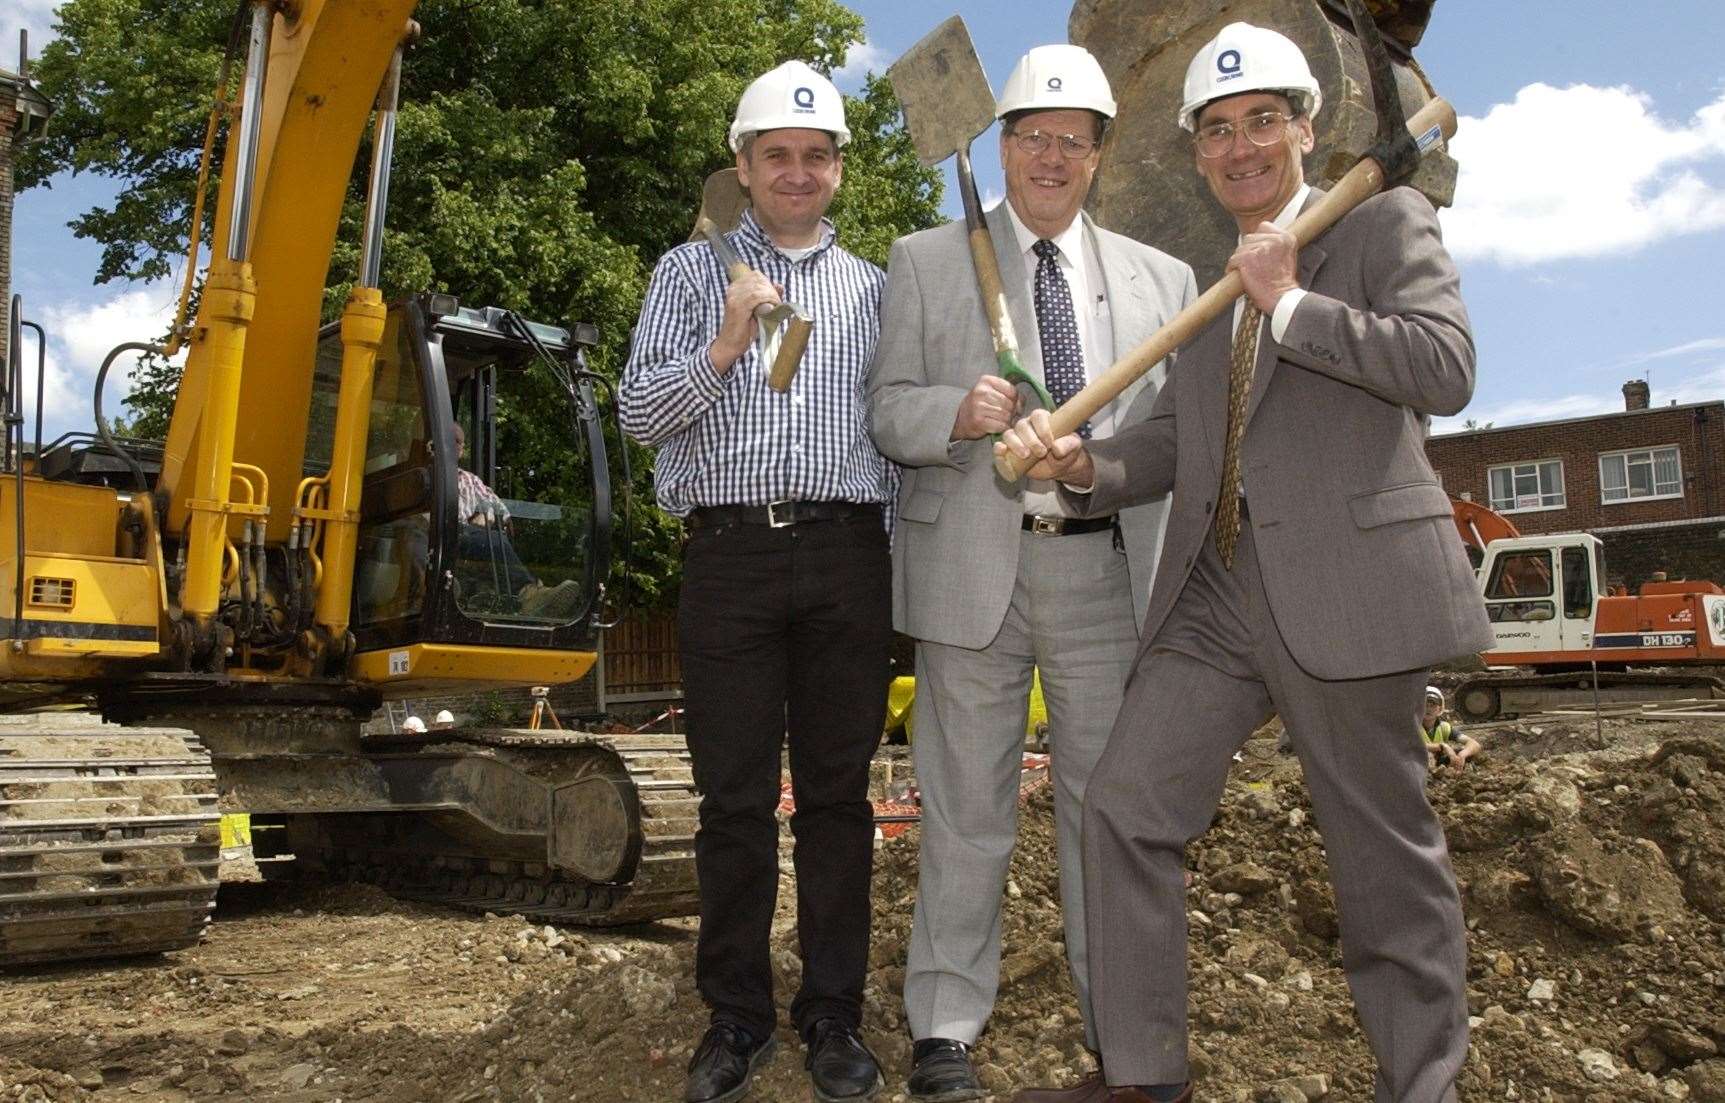 Andrew Sanalitro, Manager for Maidstone Christian Care and John Prendergast, services manager for English Church, in 2003, at the building site for Lily Smith House, in Knightrider Street, where Maidstone Day Centre is now based